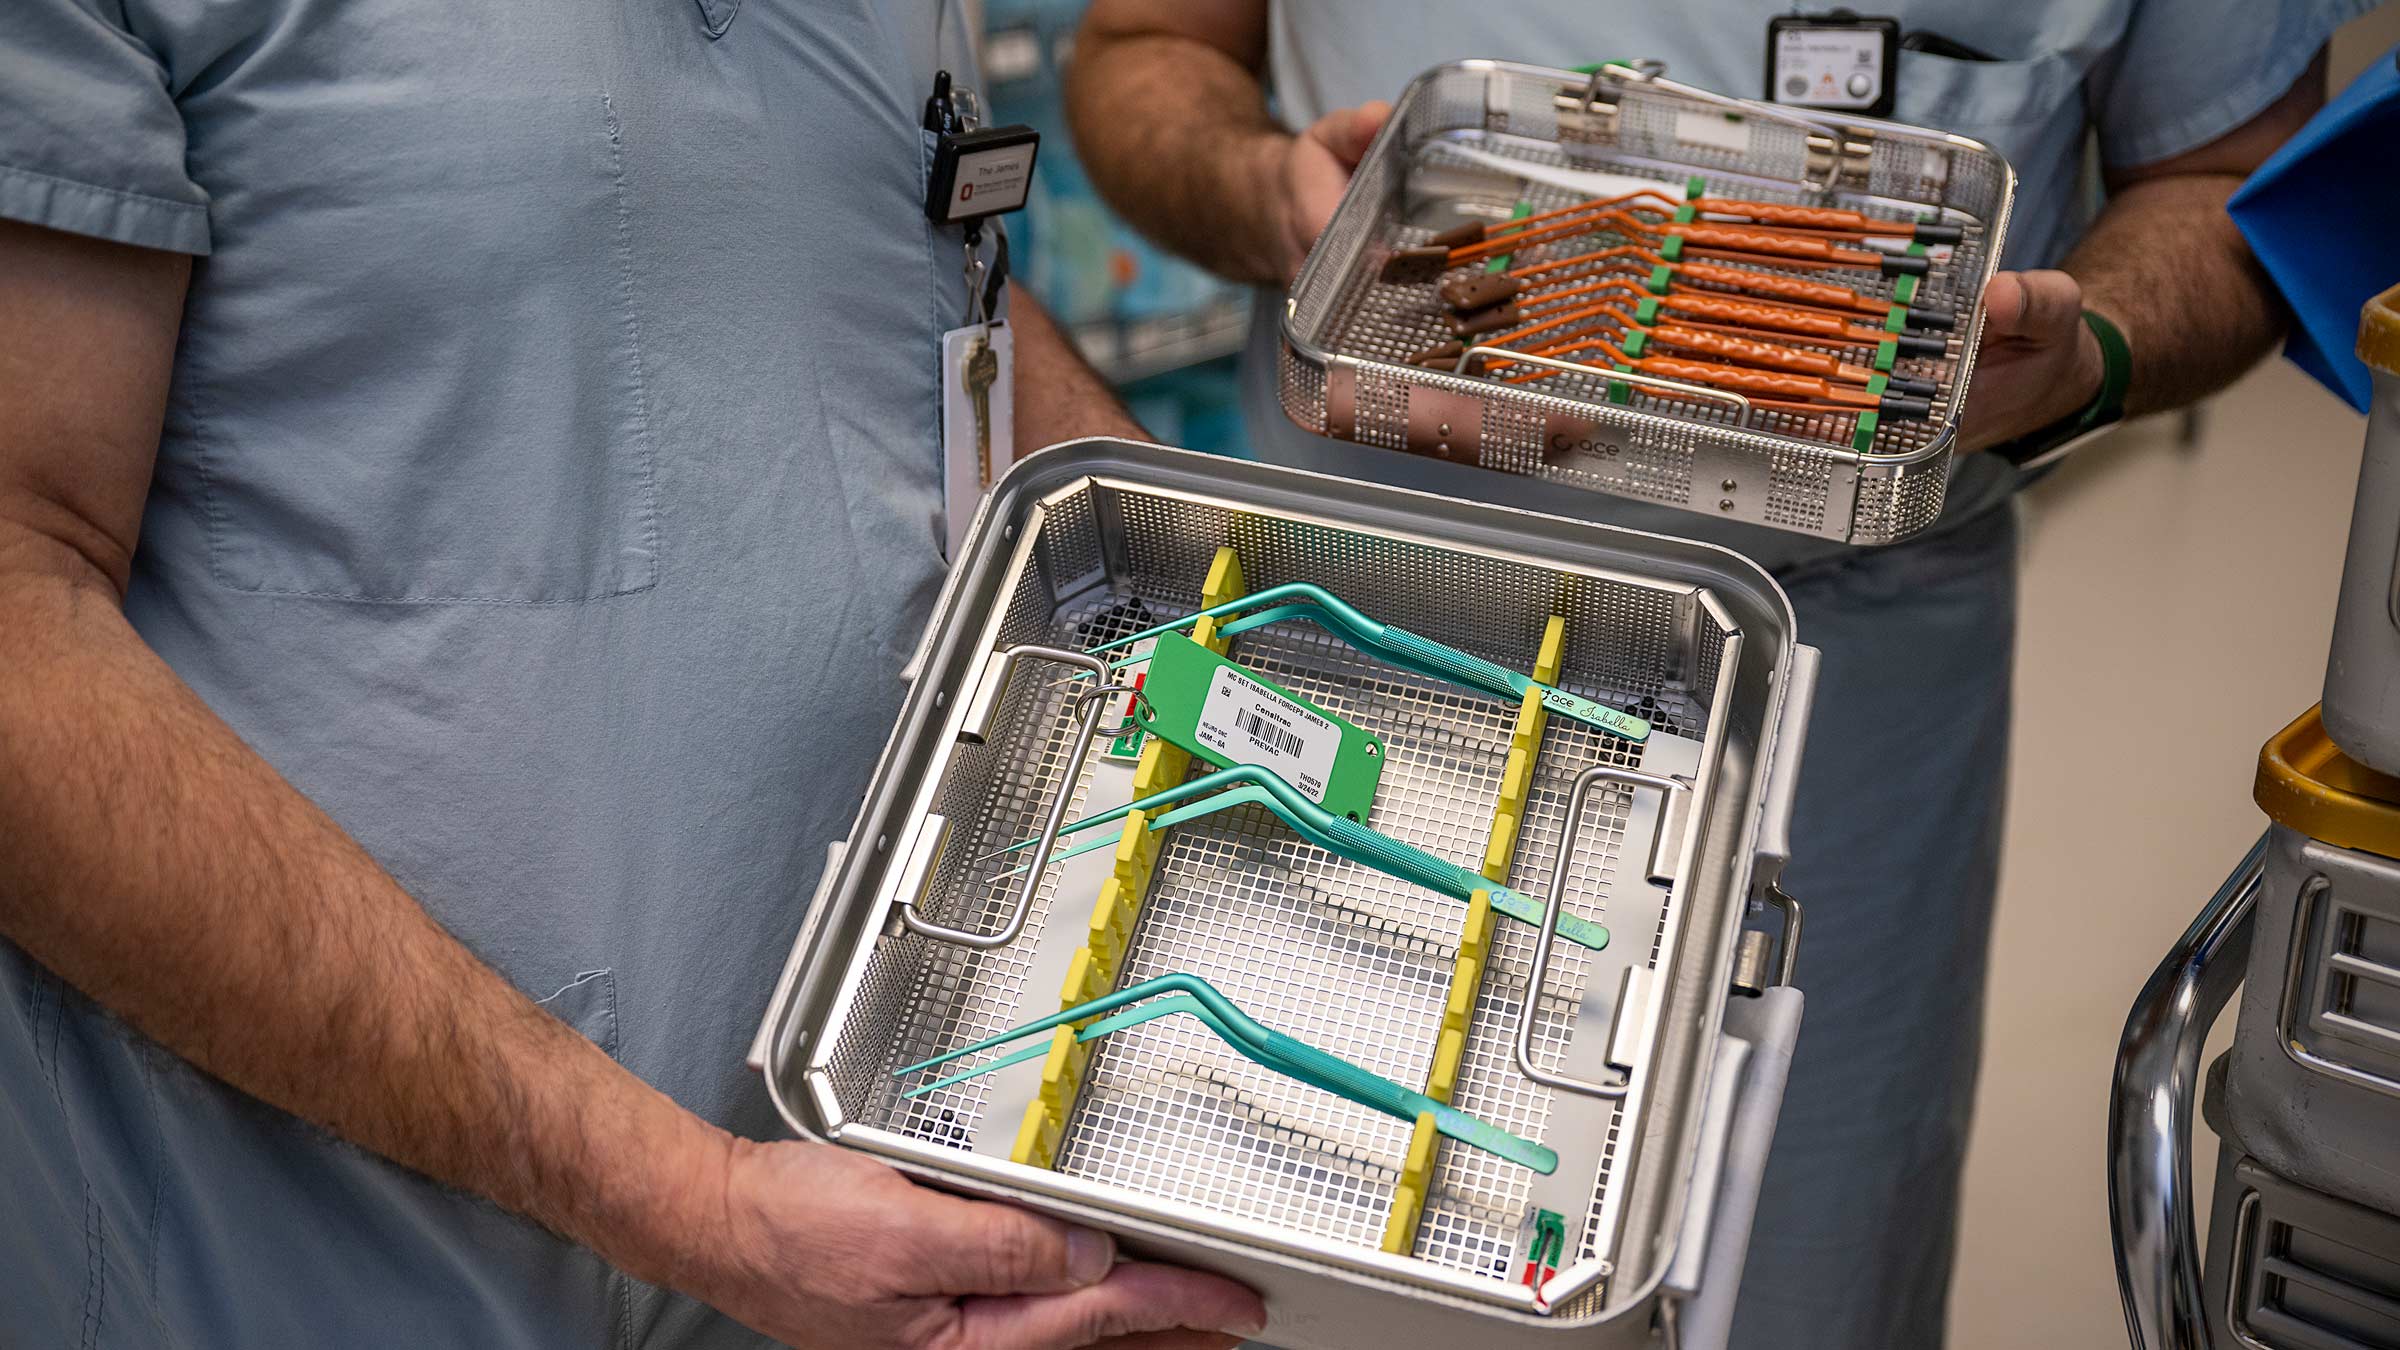 Trays of surgical tools Ohio State surgeons invented to aid with endonasal endoscopic procedures